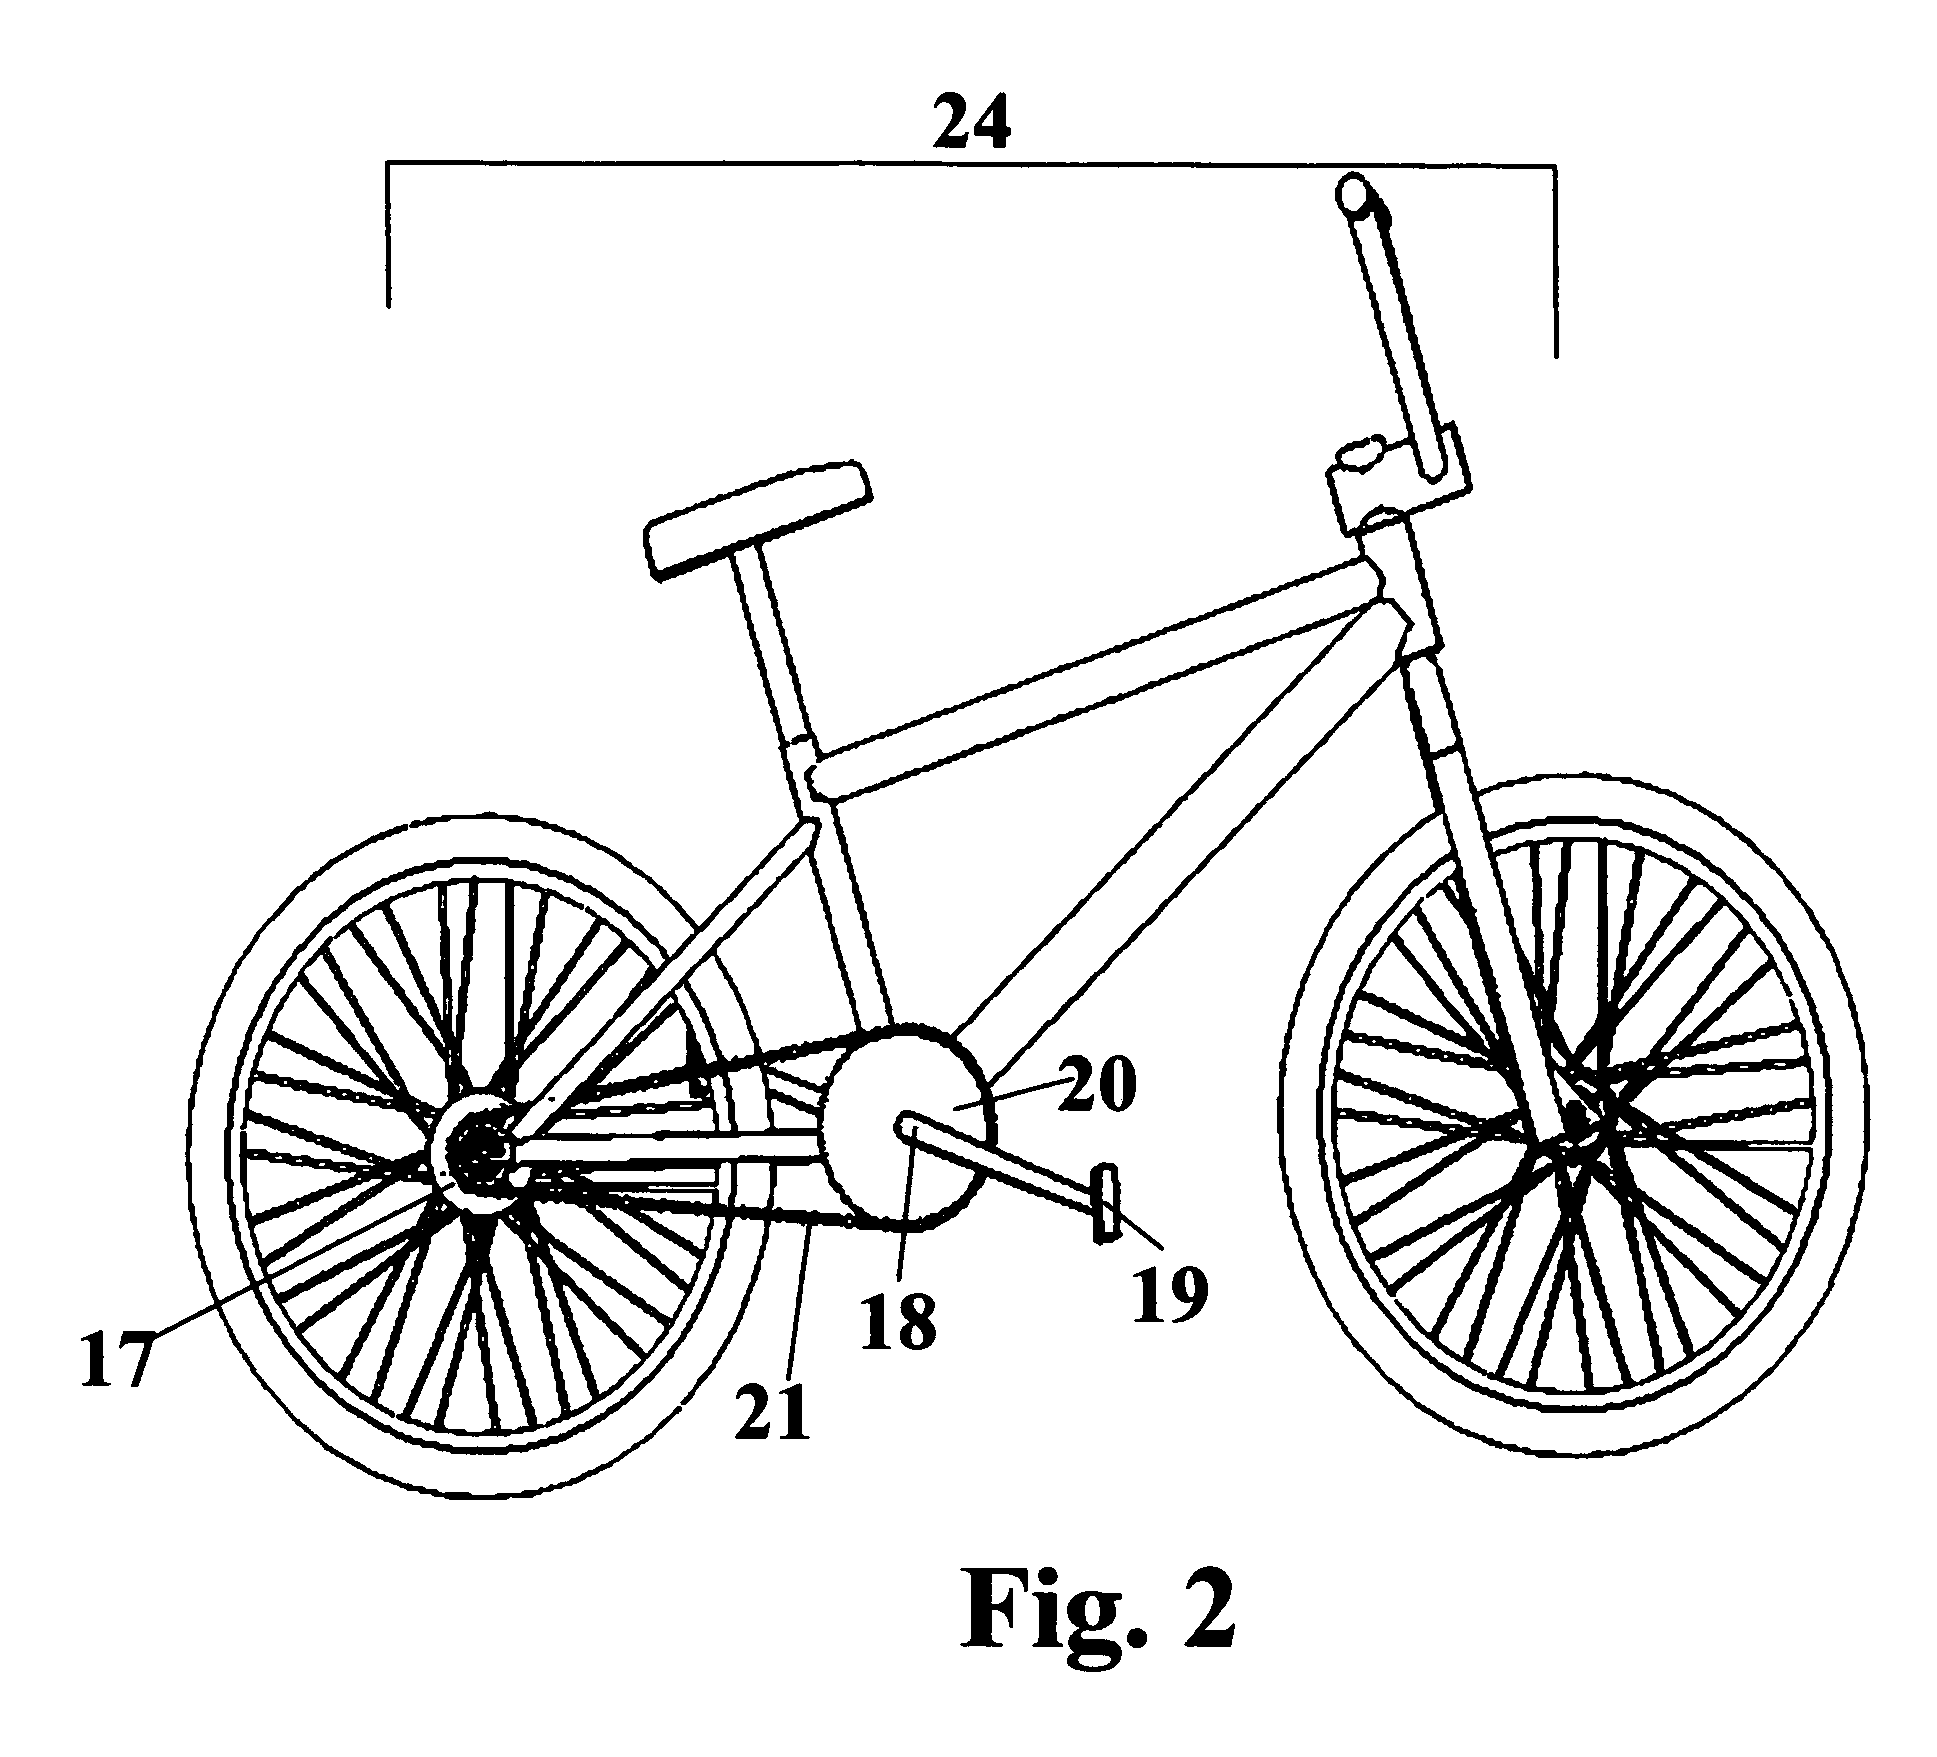 Apparatus and method for measuring dynamic parameters for a driven wheel